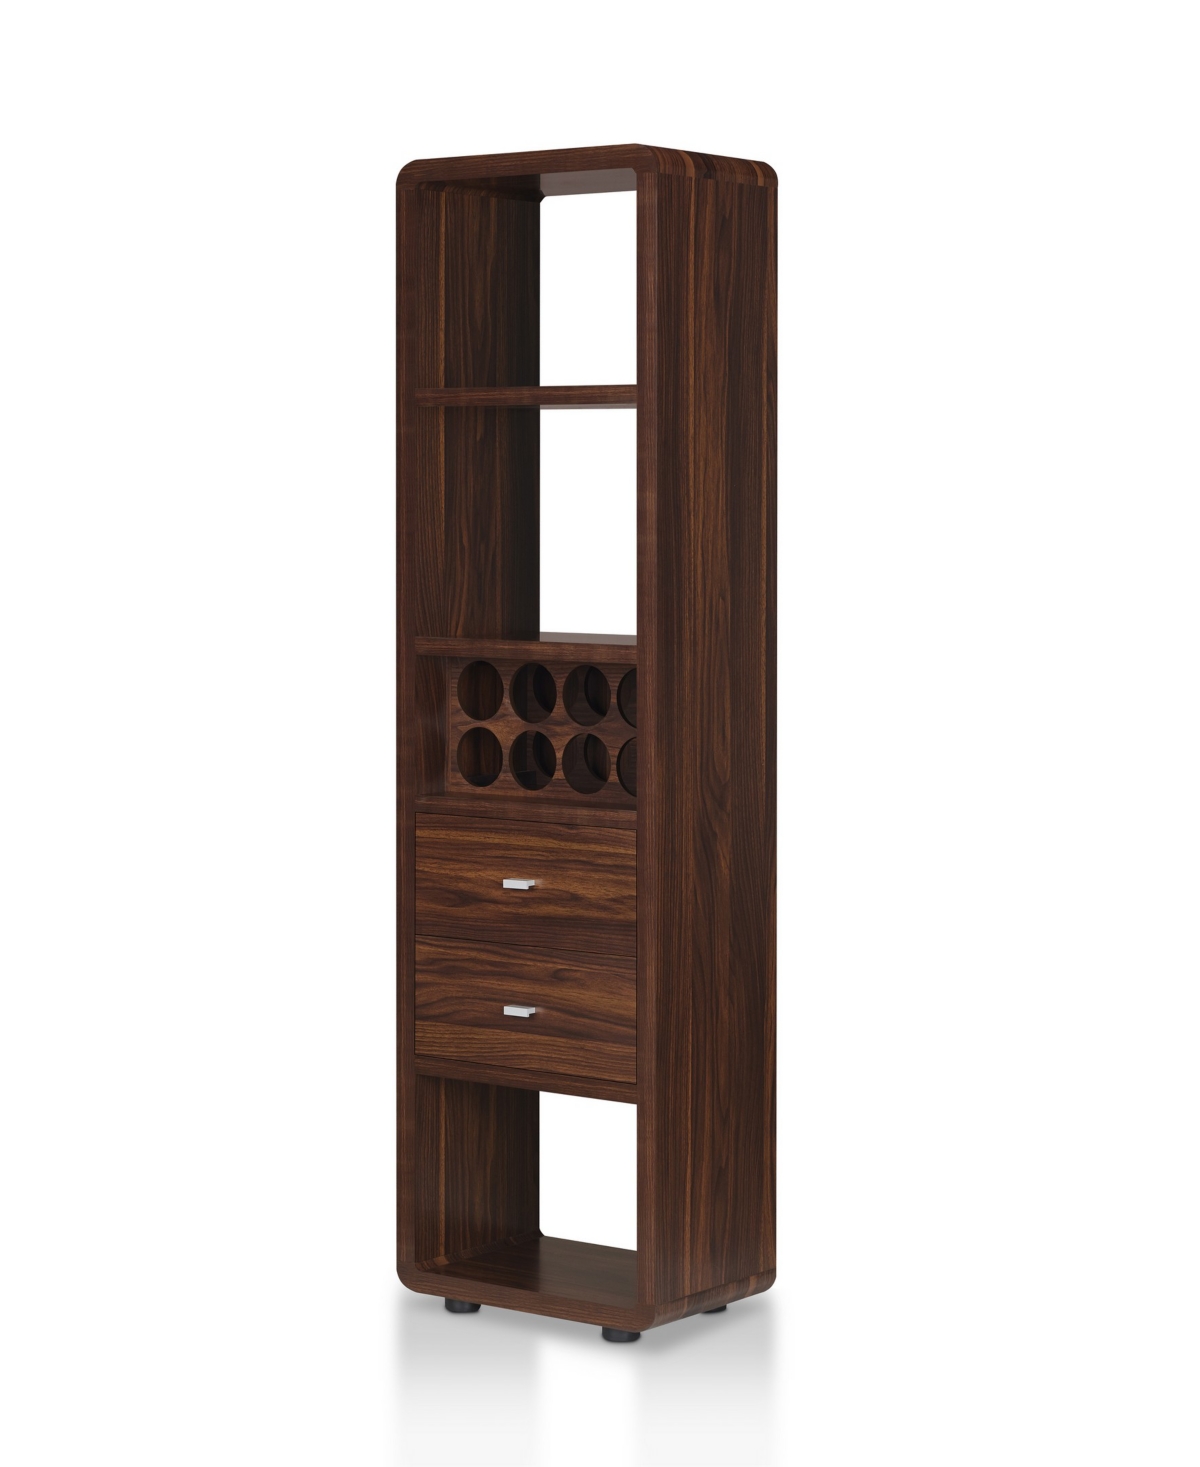 FURNITURE OF AMERICA LIONELL STANDING WINE CABINET